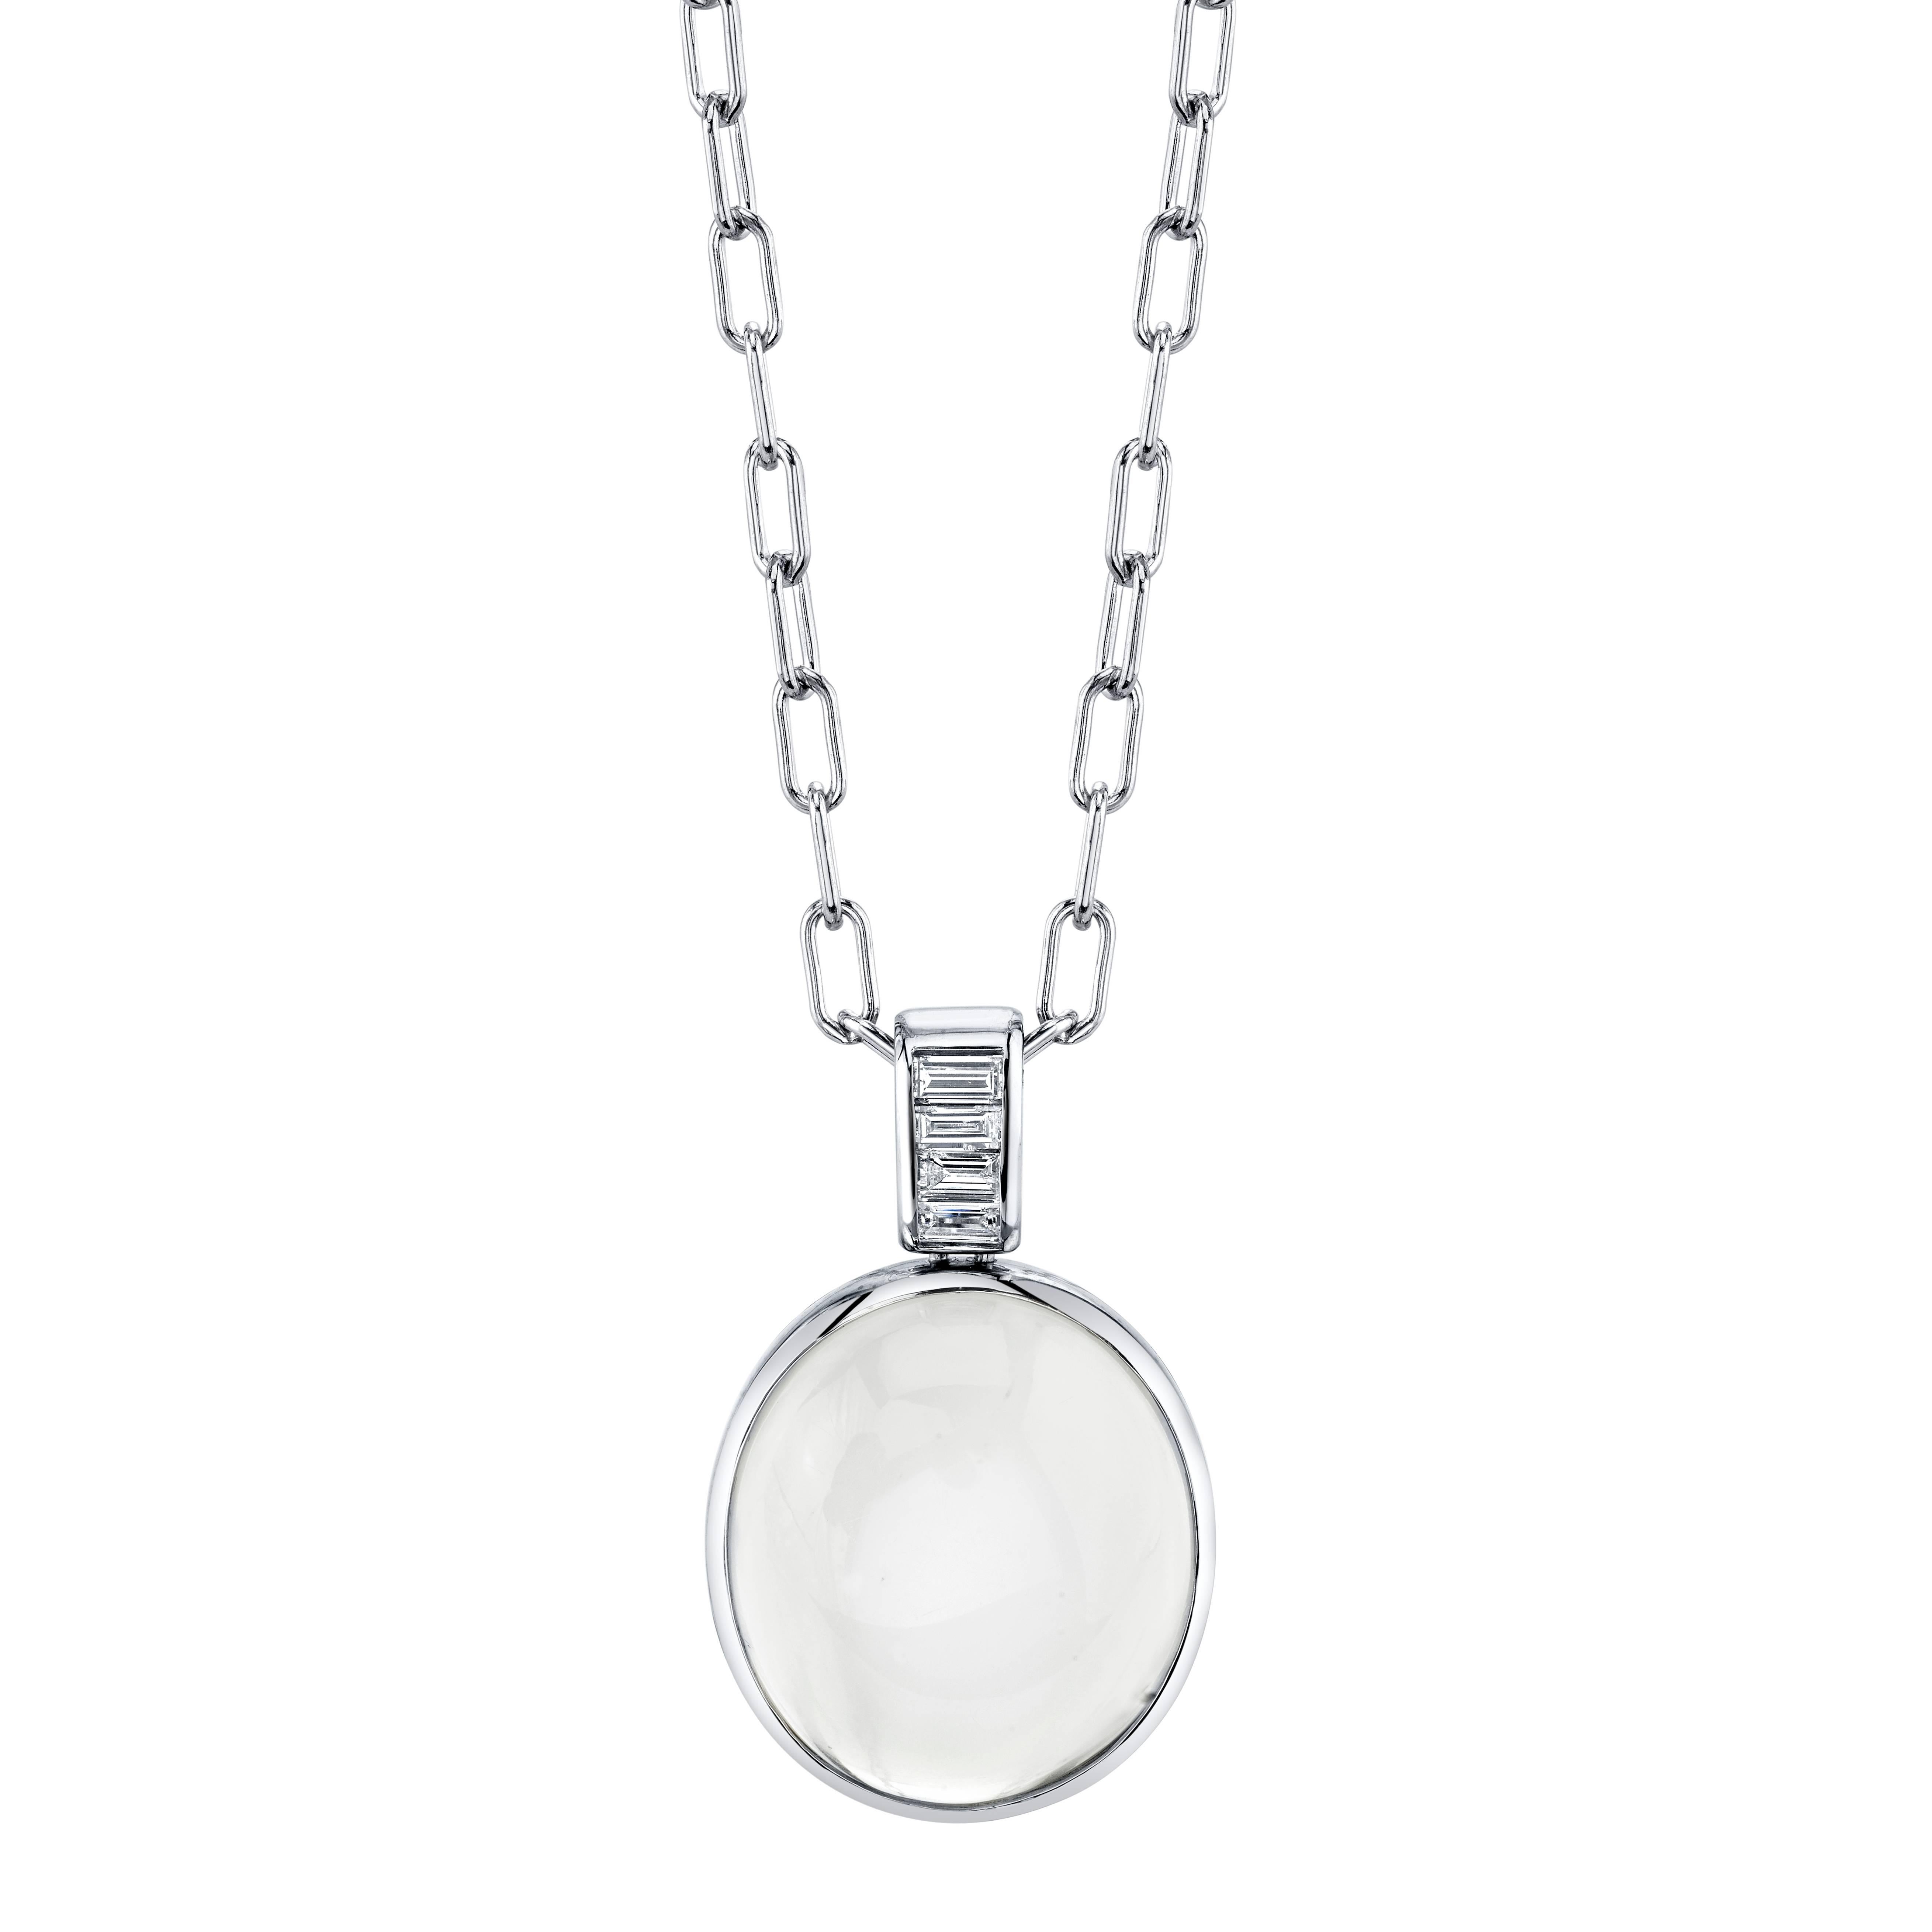 29.72 Carat Oval Moonstone and Diamond 18k White Gold Pendant Necklace